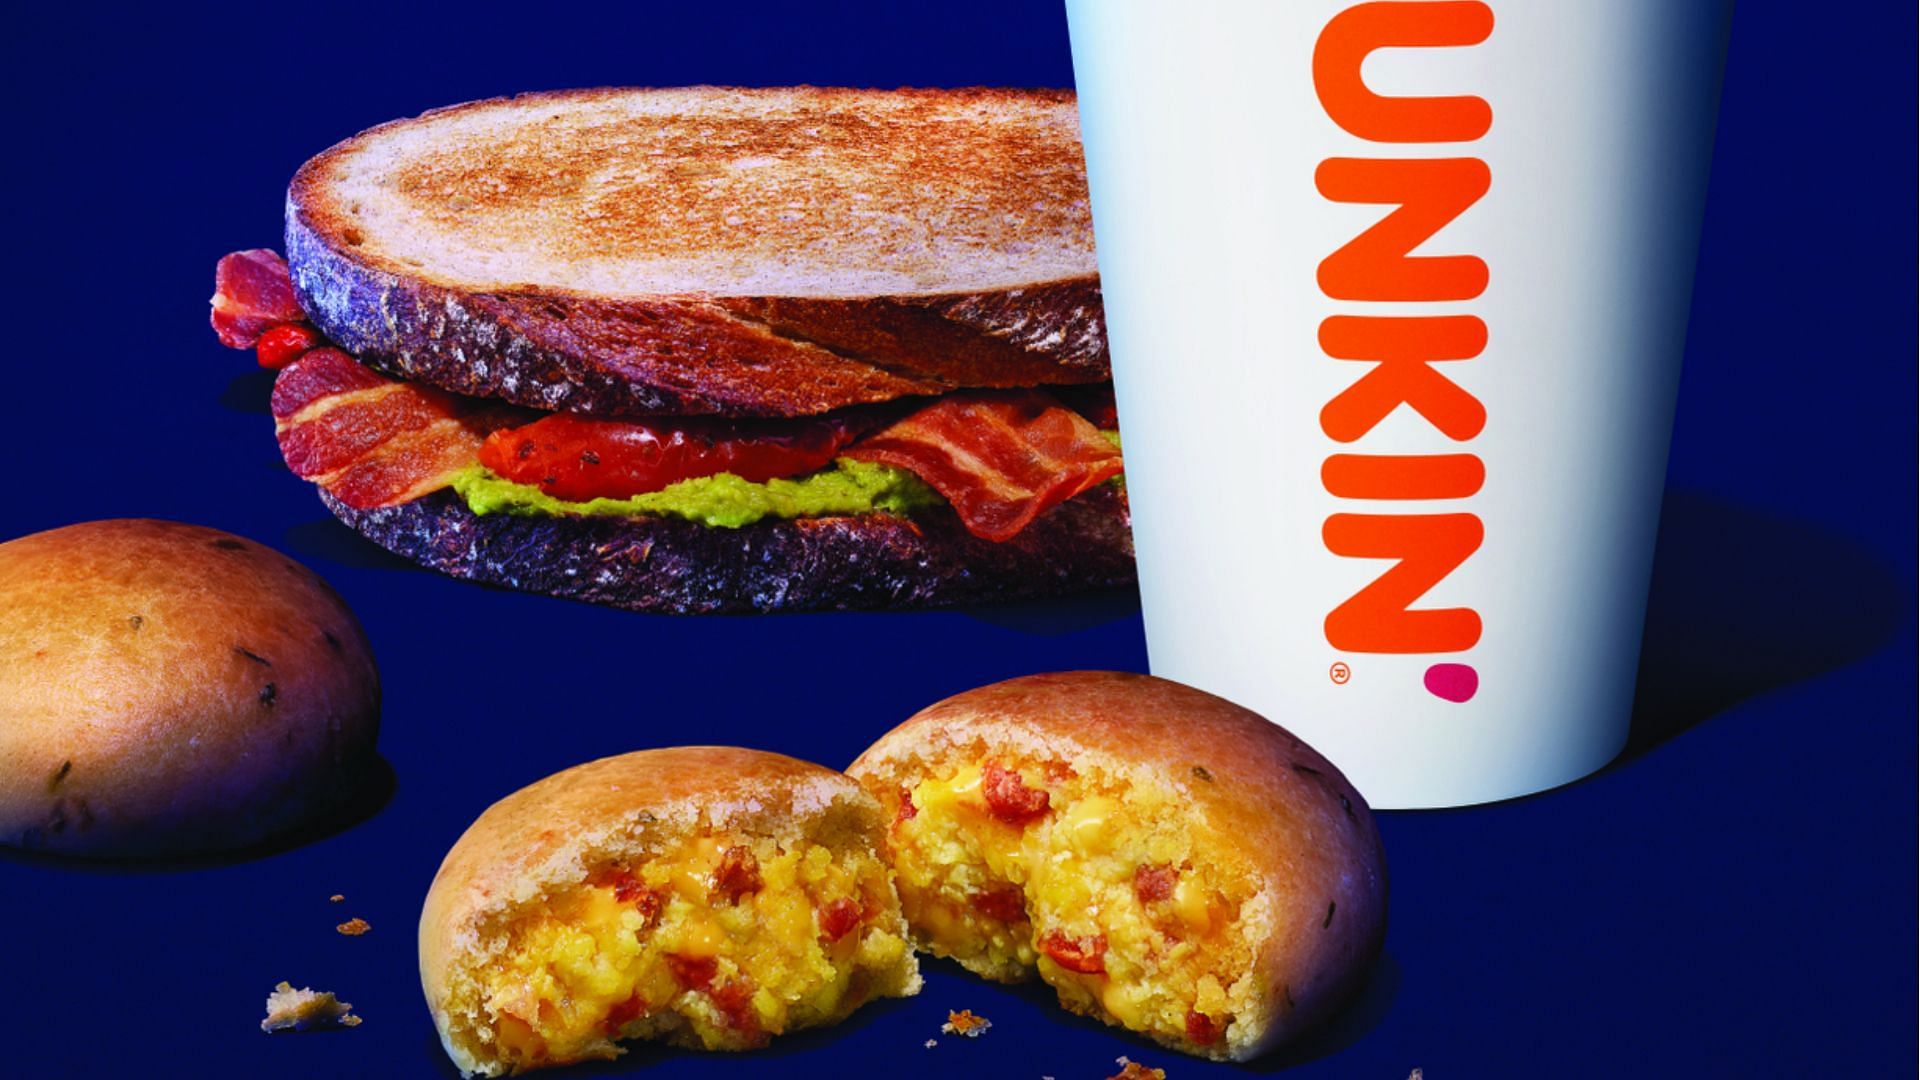 Dunkin’s New Winter Menu explored as brand launches new items for